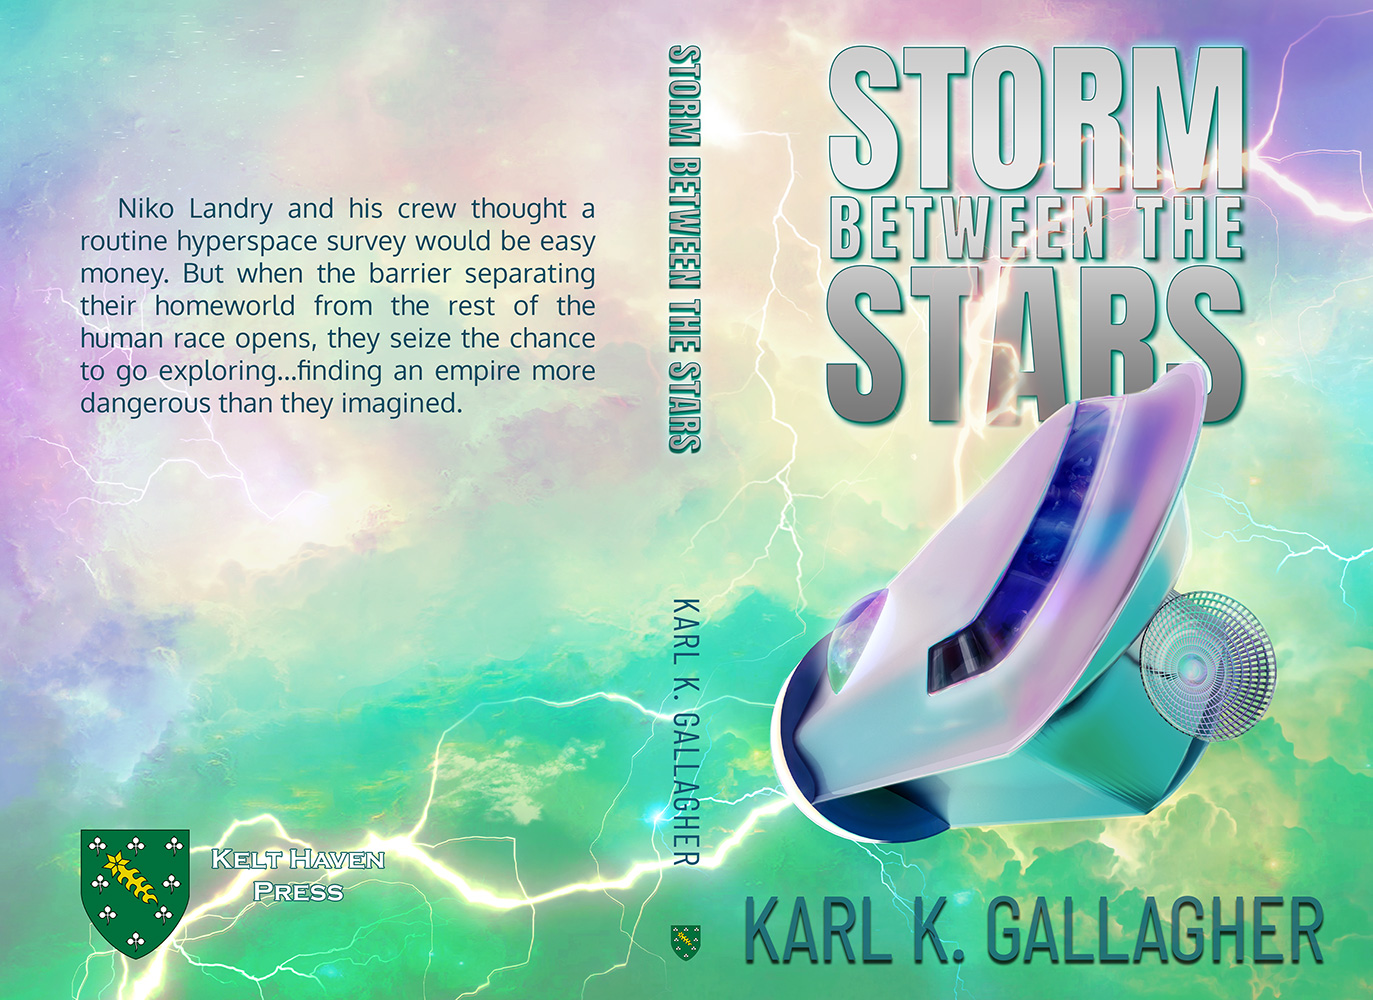 Cover of Karl Gallagher's Storm between the stars